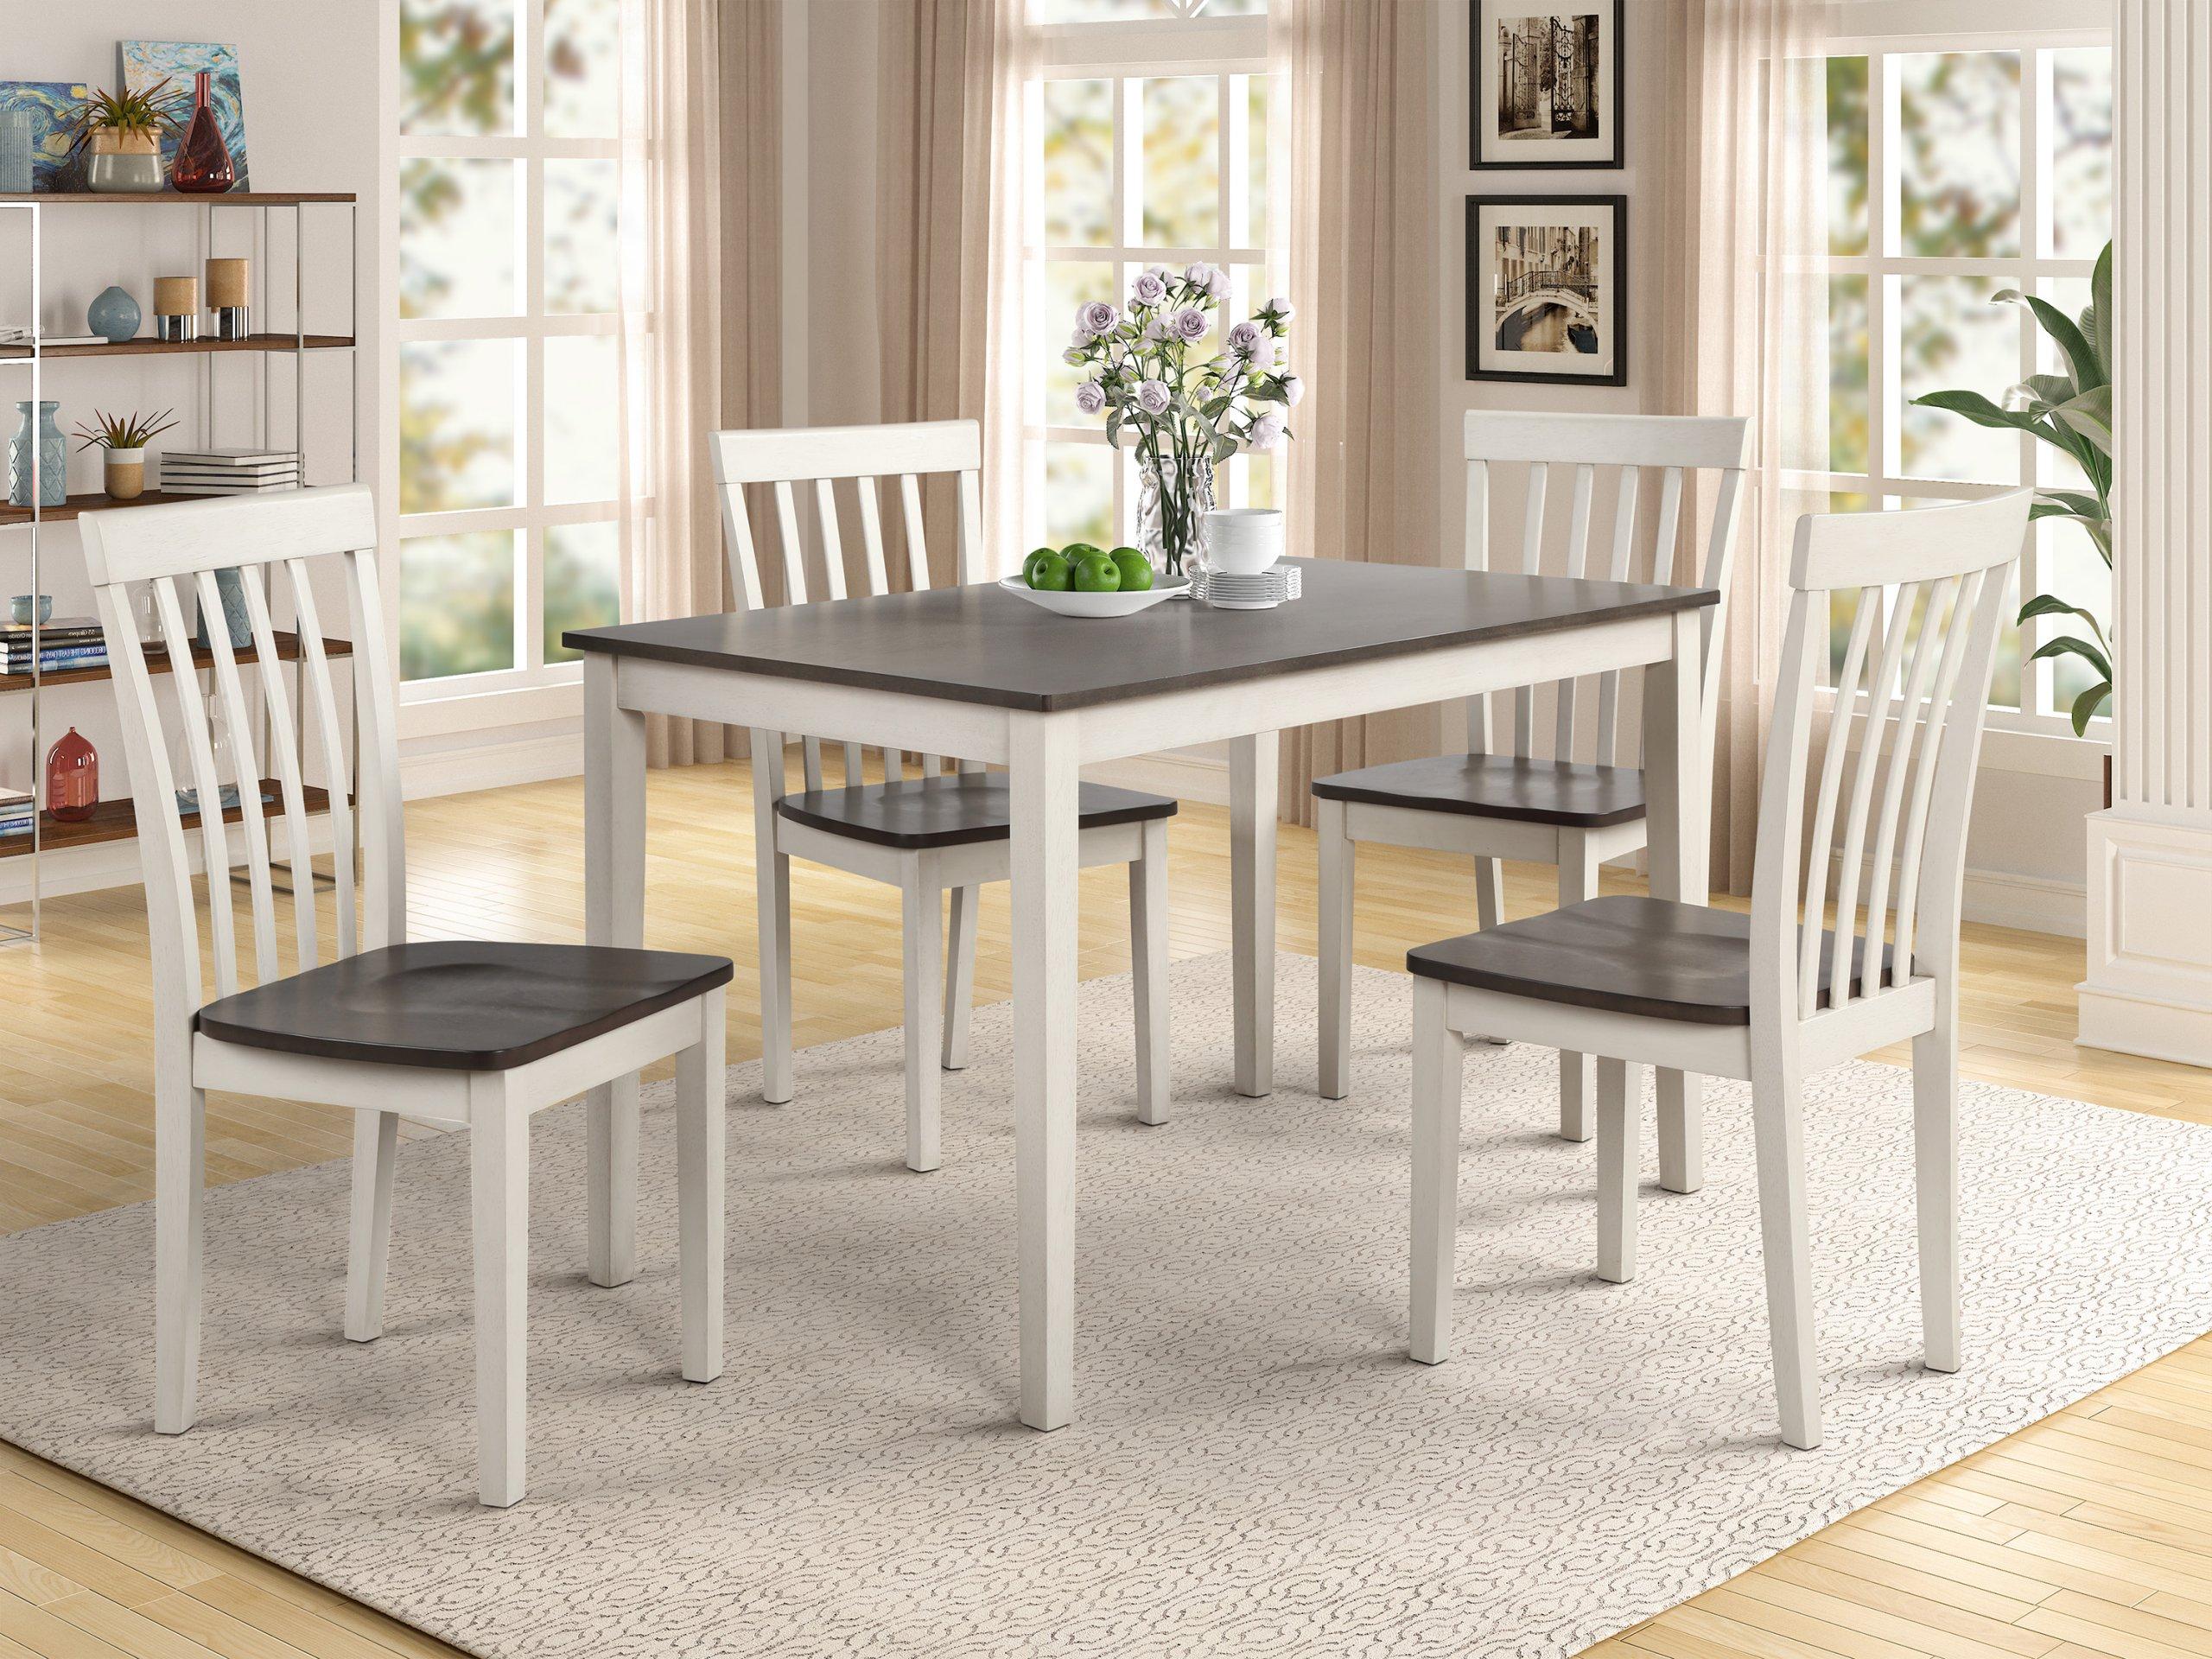 Simple, Farmhouse Dining Room Set Brody 2182SET-WH/GY-5pcs in White 